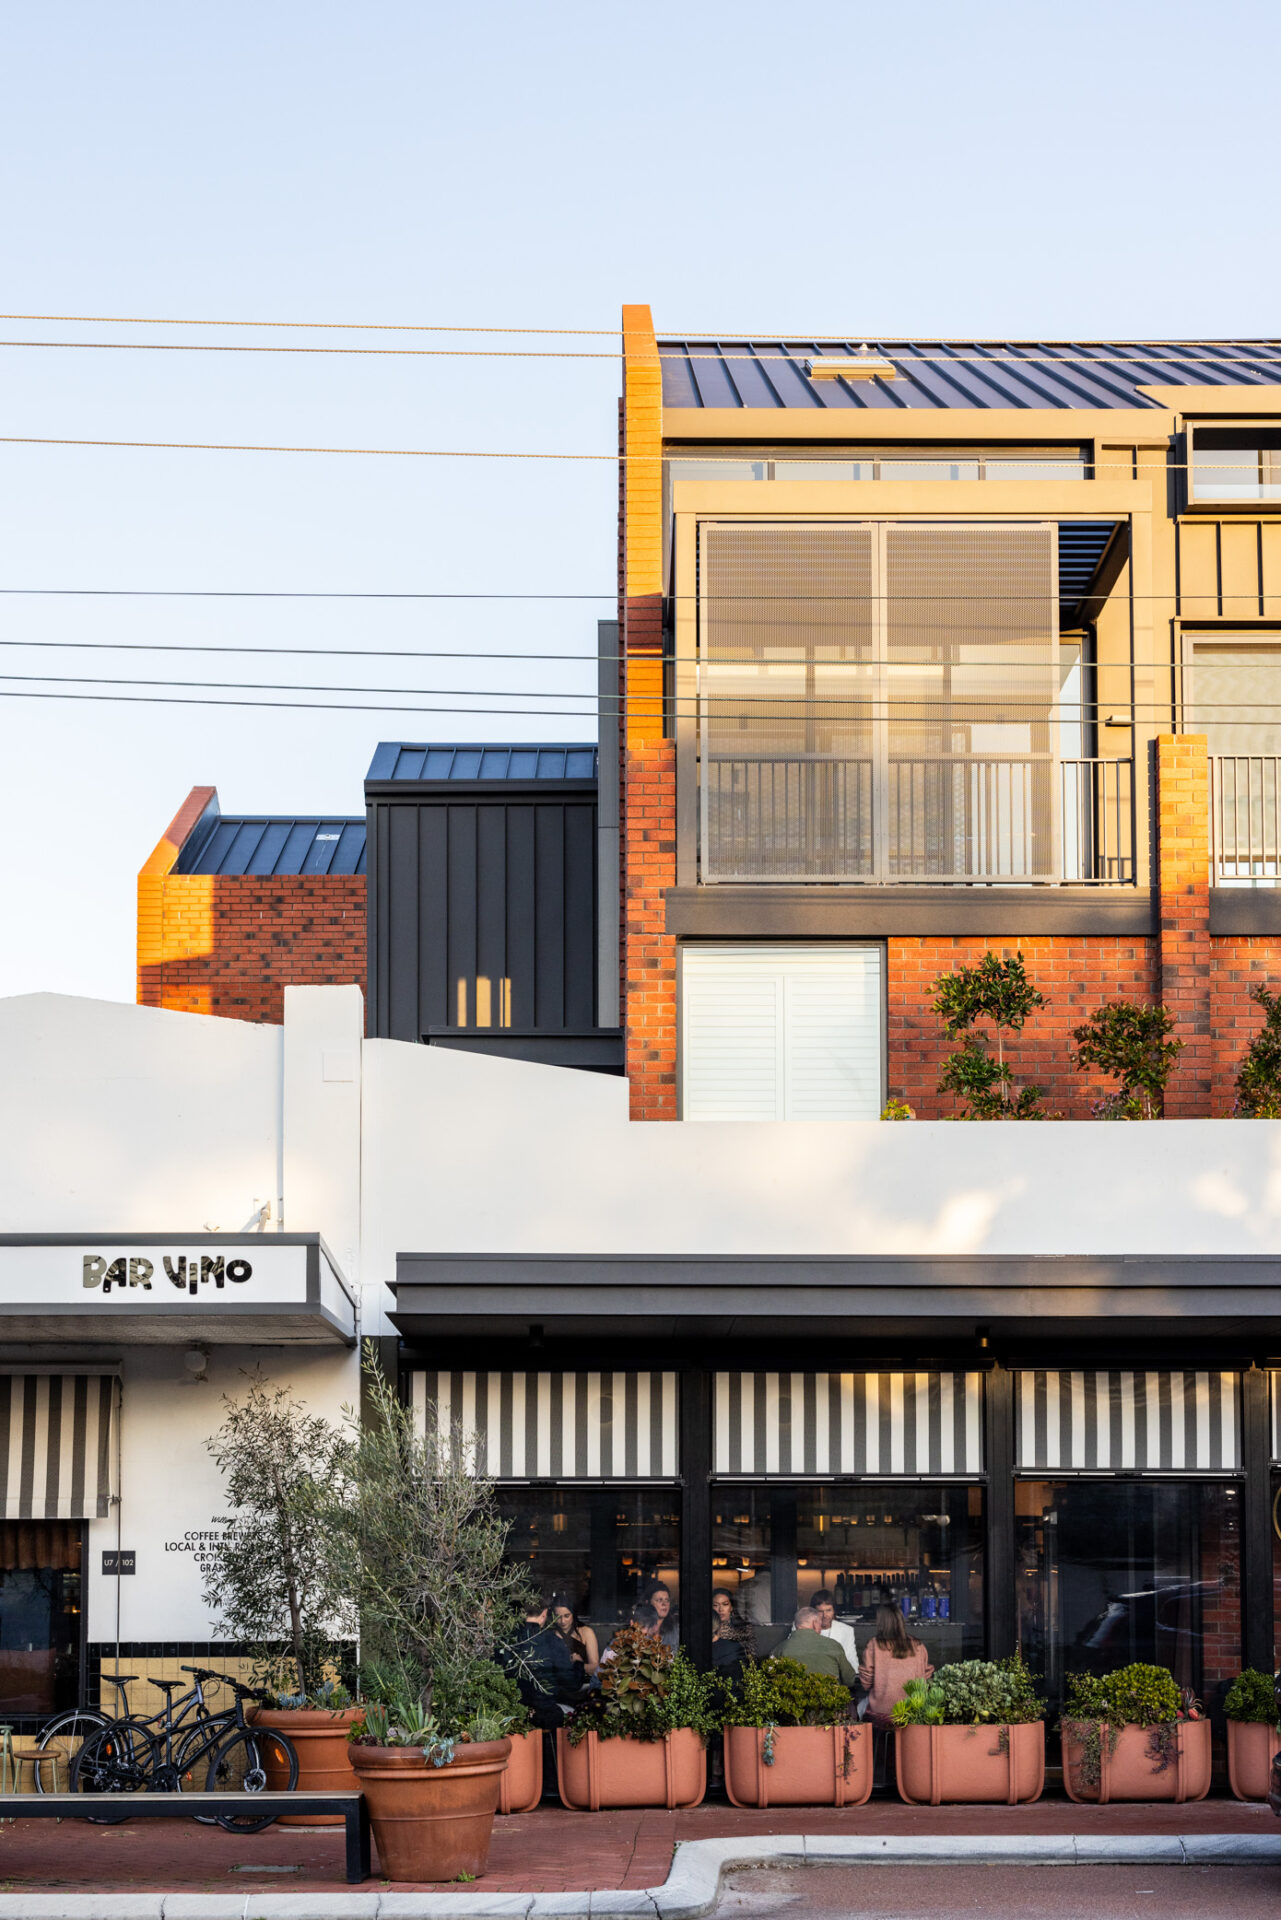 Elevation of the Bar Vino facade and awing in Mount Lawley